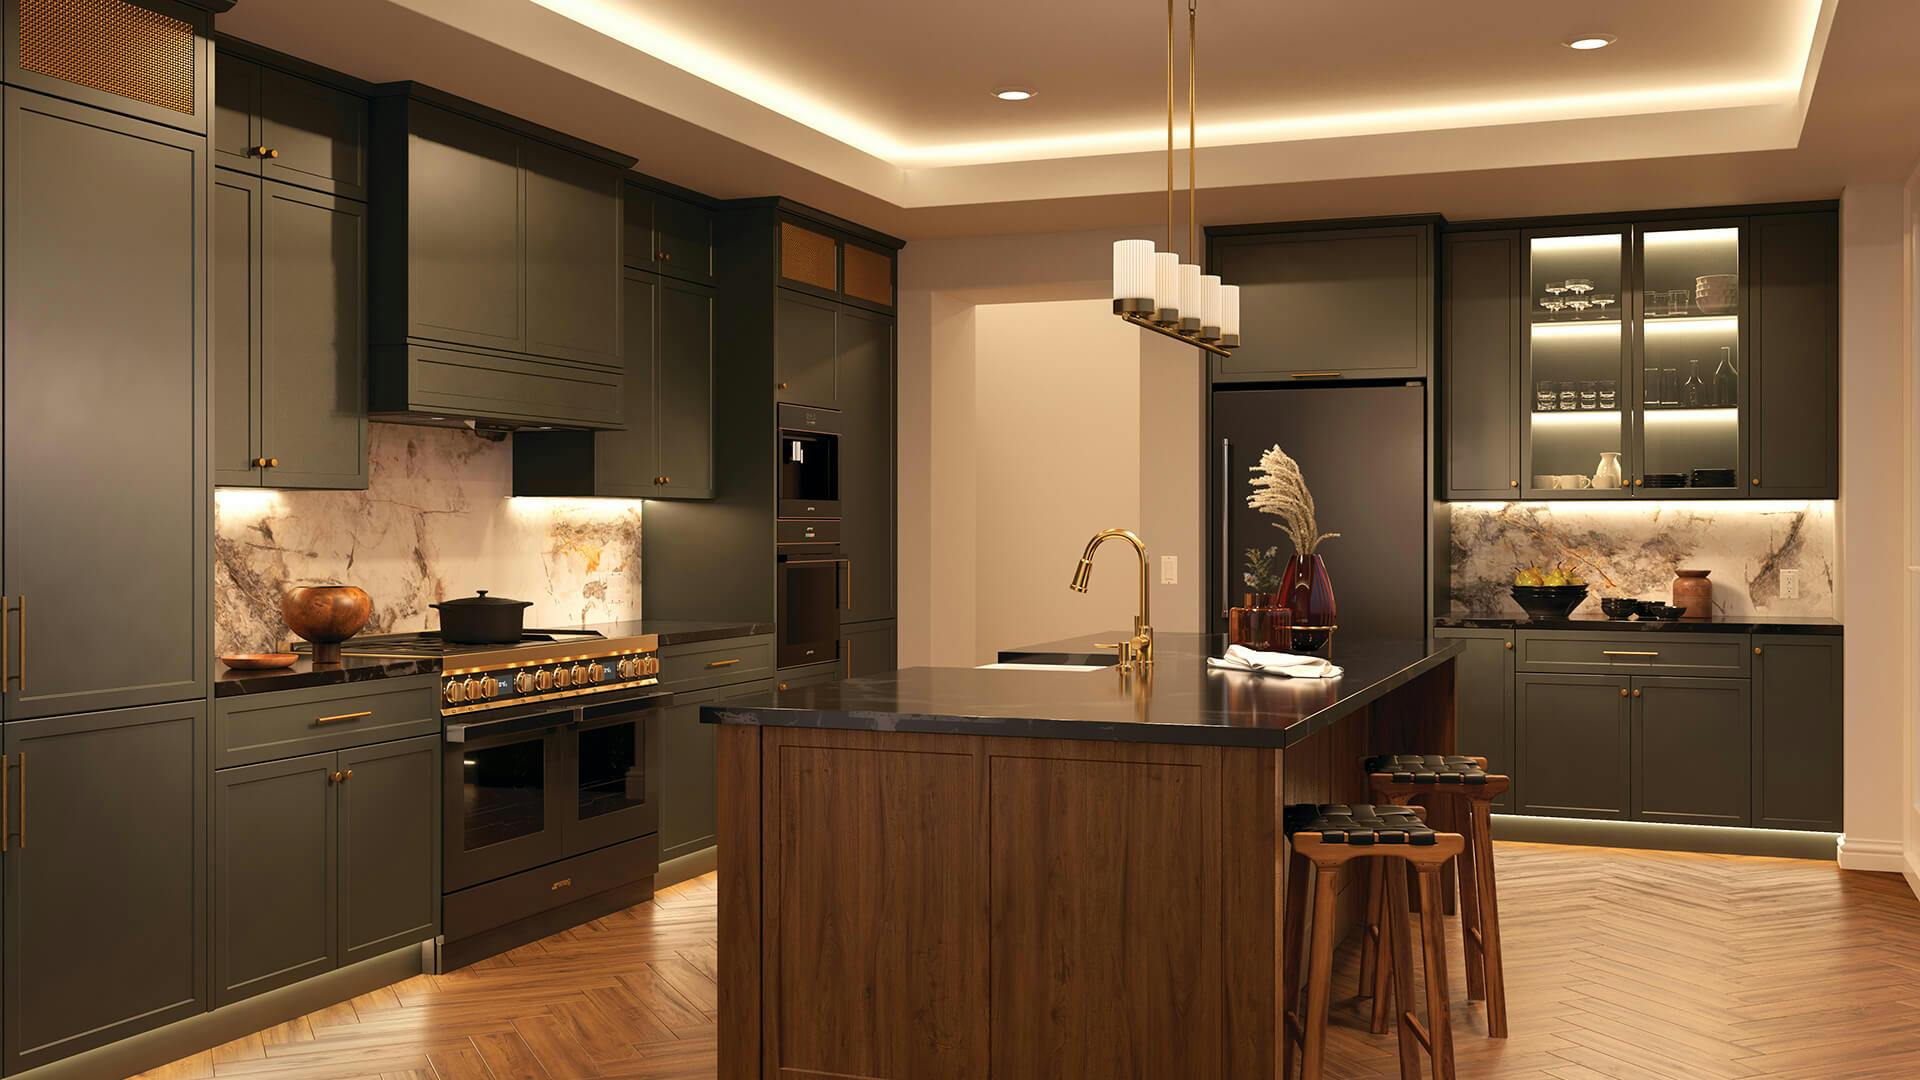 Warm kitchen with channel lighting lining the ceiling